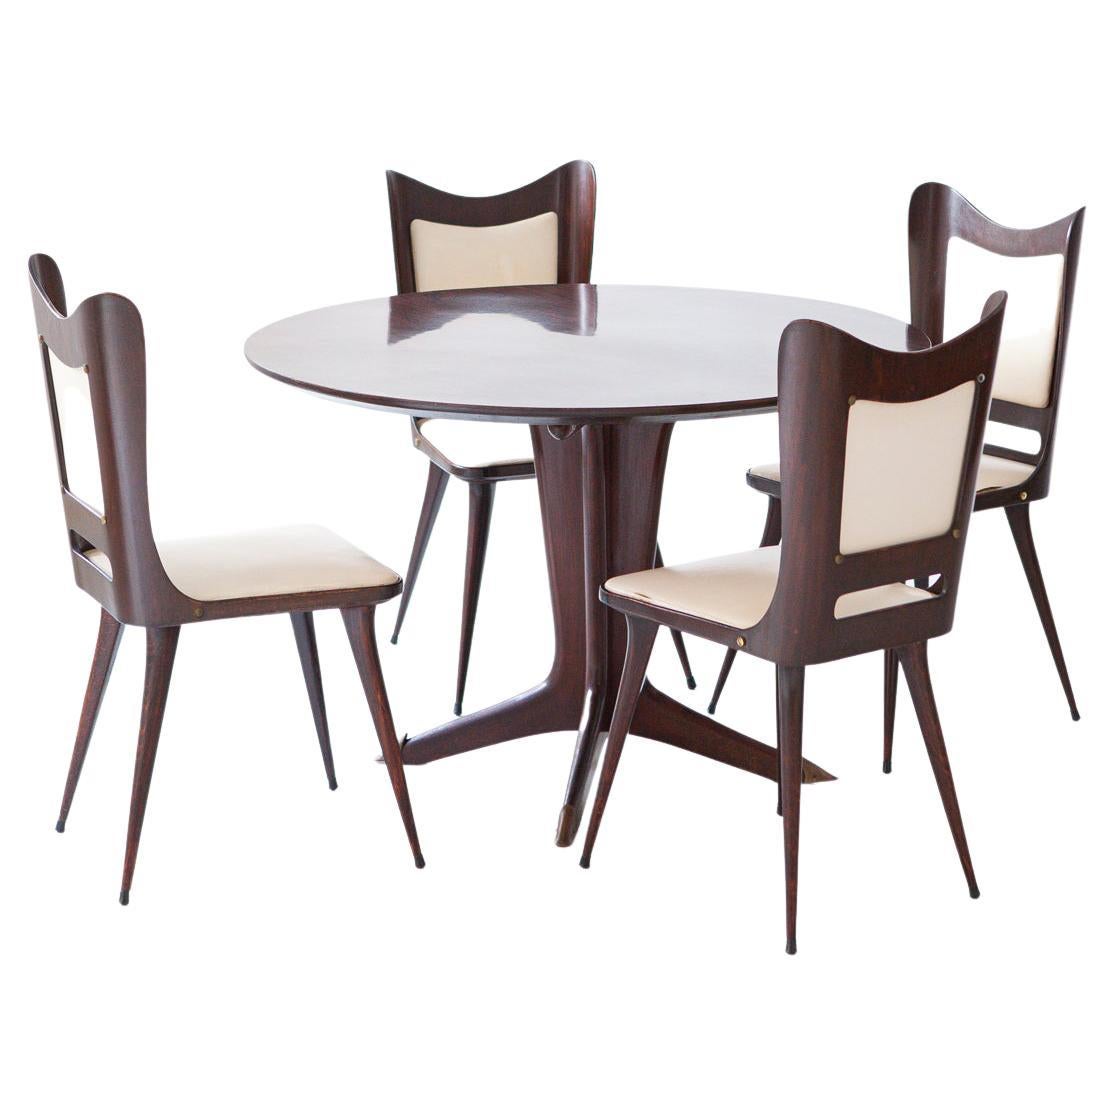 Italian Round Wooden Dining Table with 4 Chairs Set by Carlo Ratti